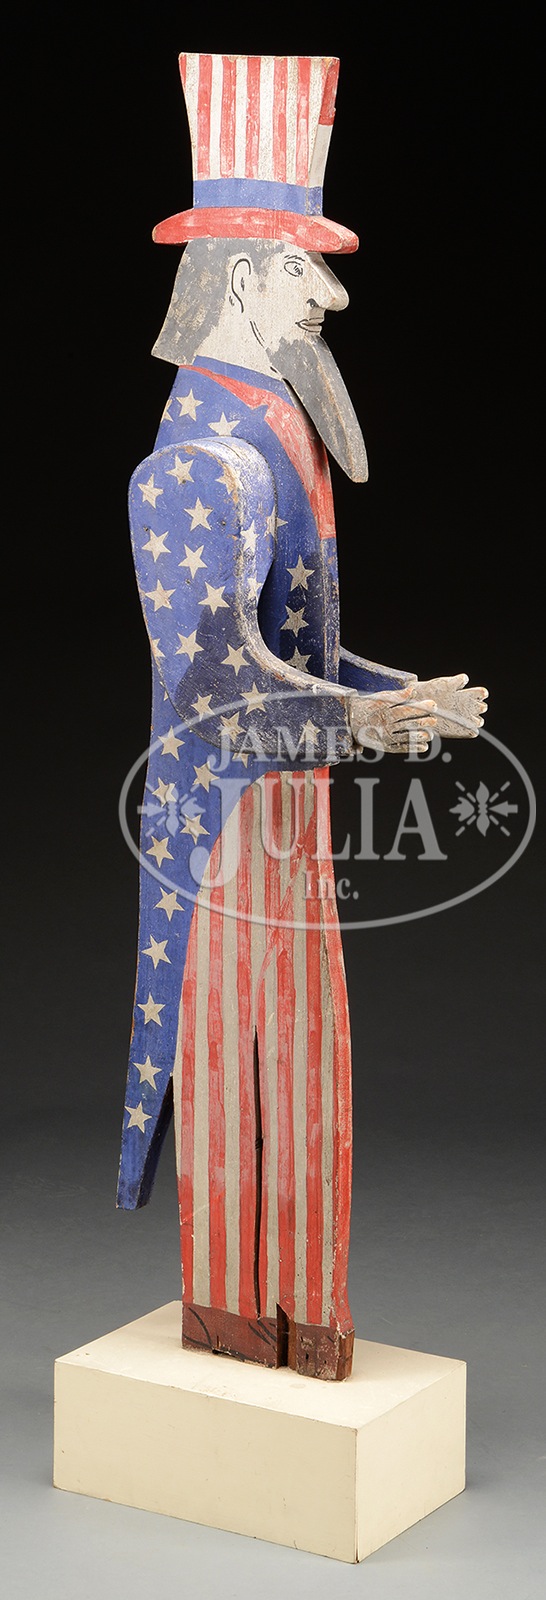 UNCLE SAM CARVED AND PAINTED MAILBOX HOLDER. The standing Uncle Sam in red, white and blue outfit